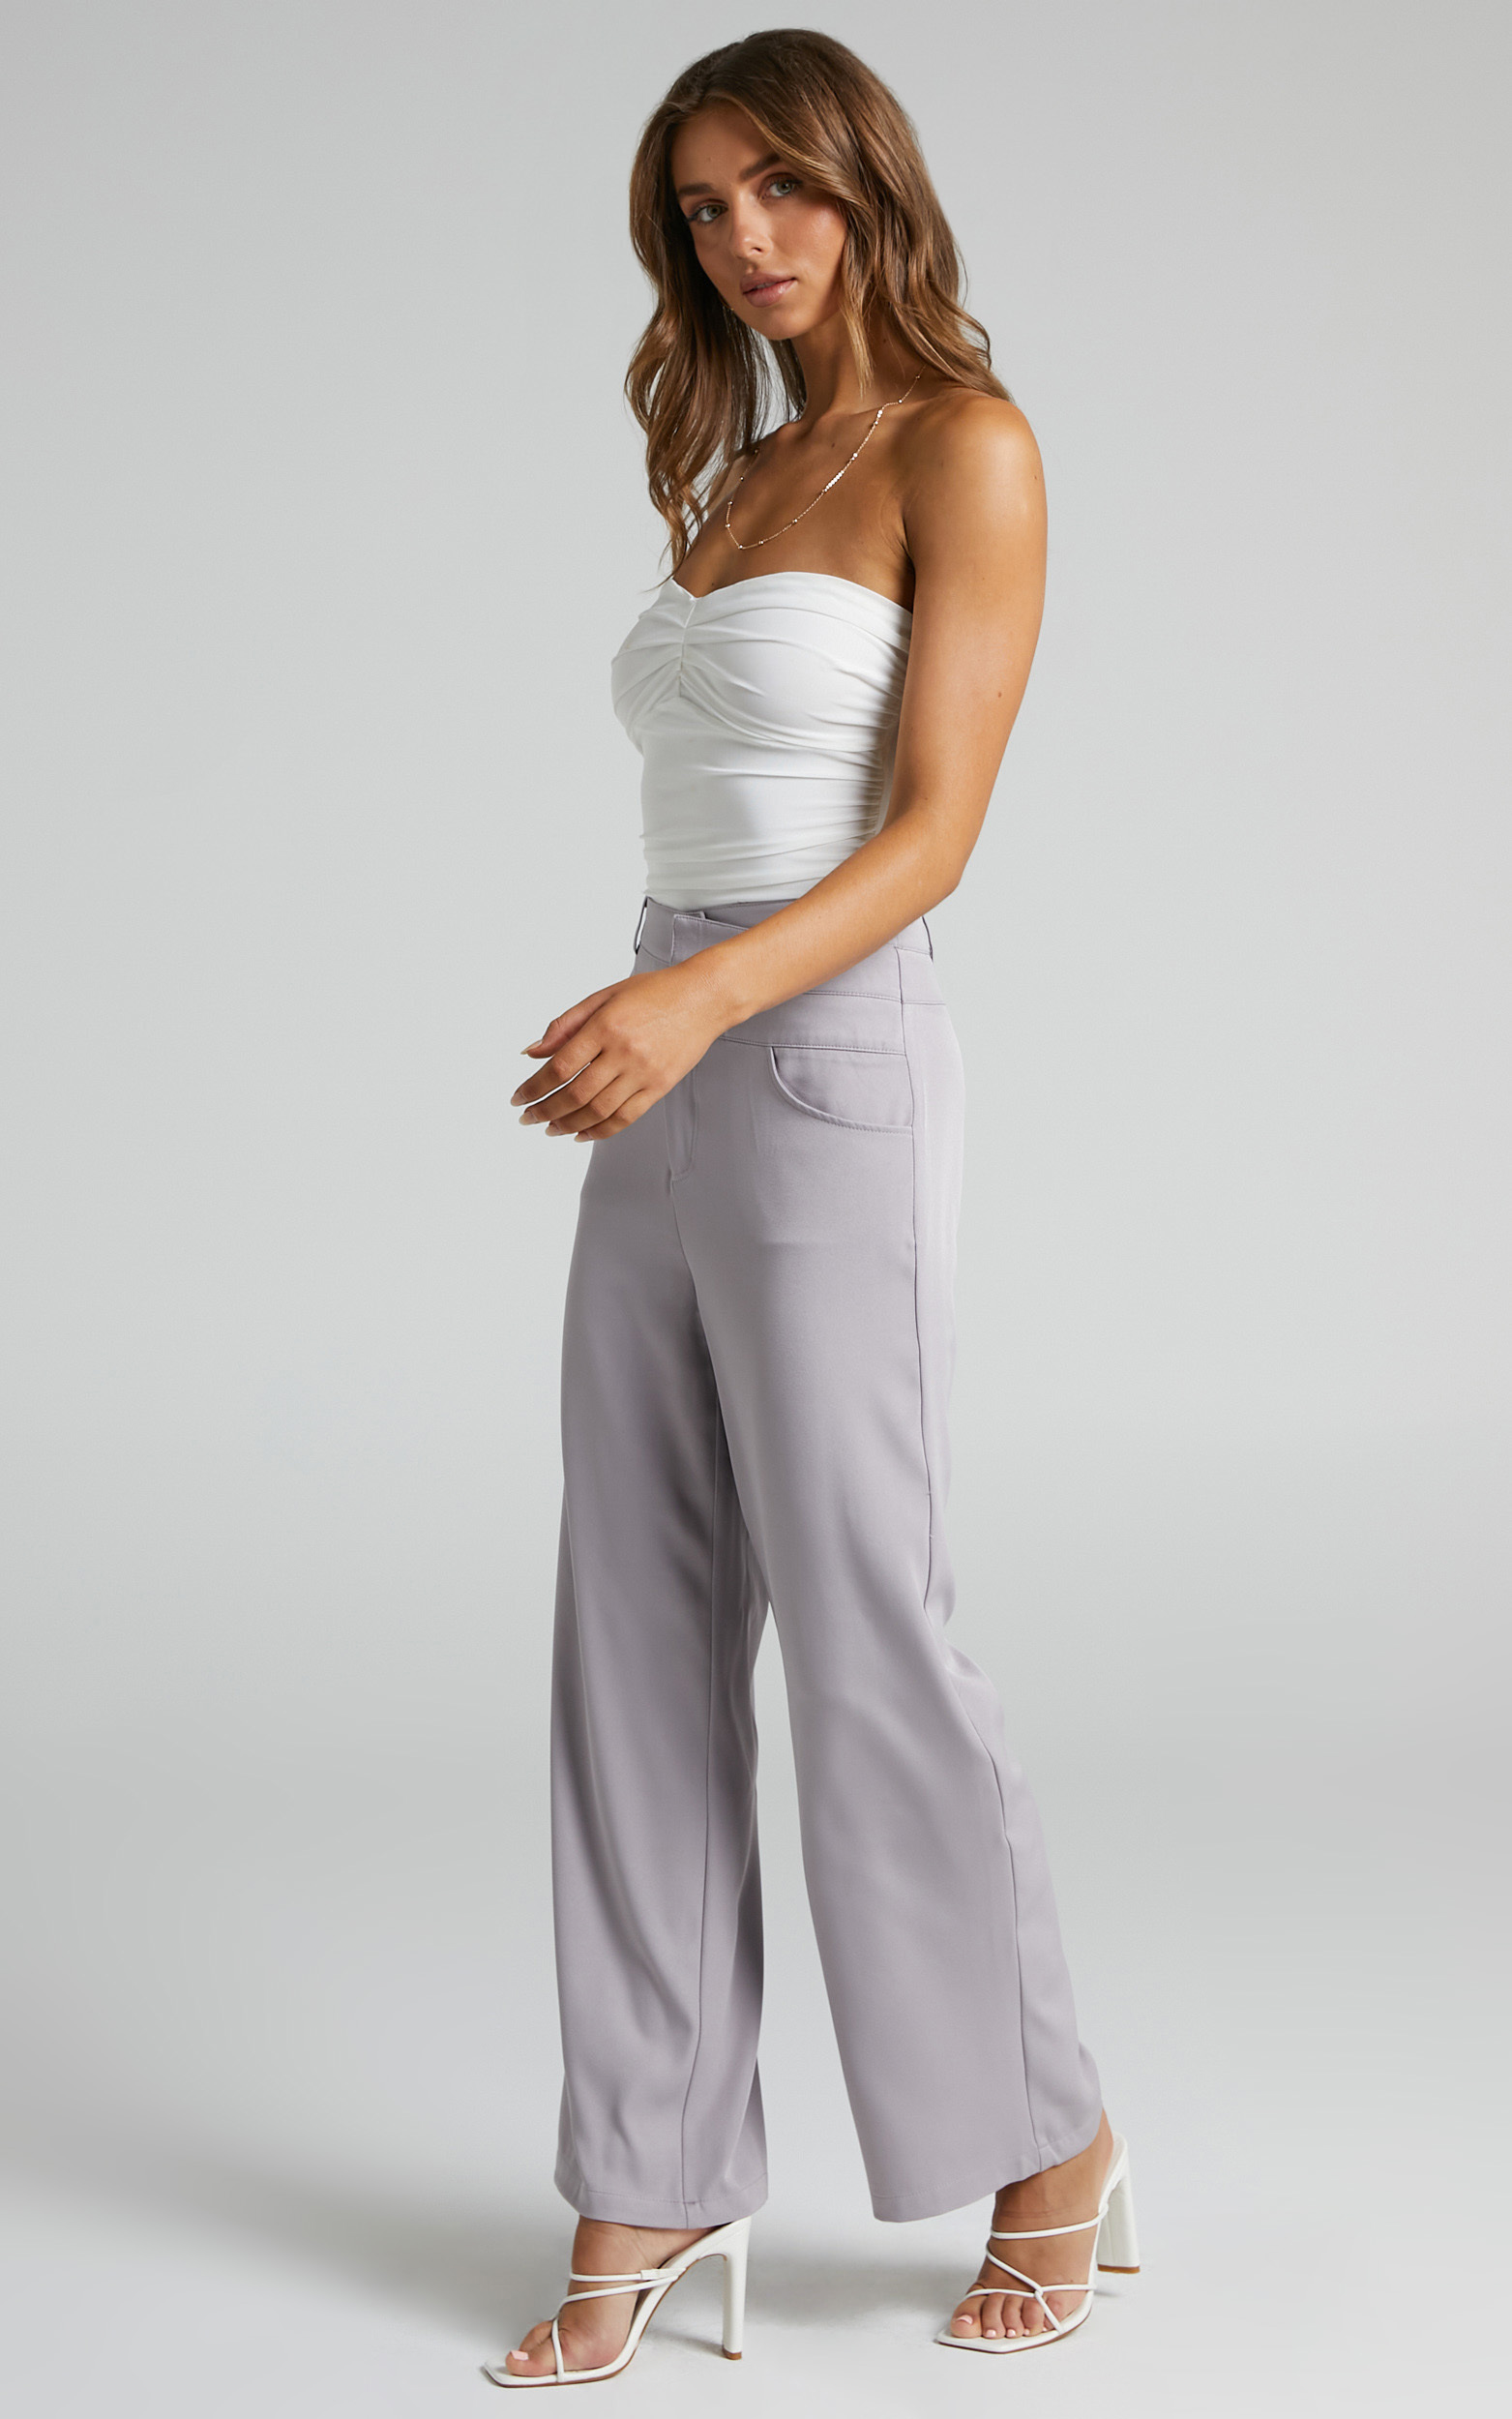 4th & Reckless - Elodie Trouser in Lilac - 06, PRP1, hi-res image number null